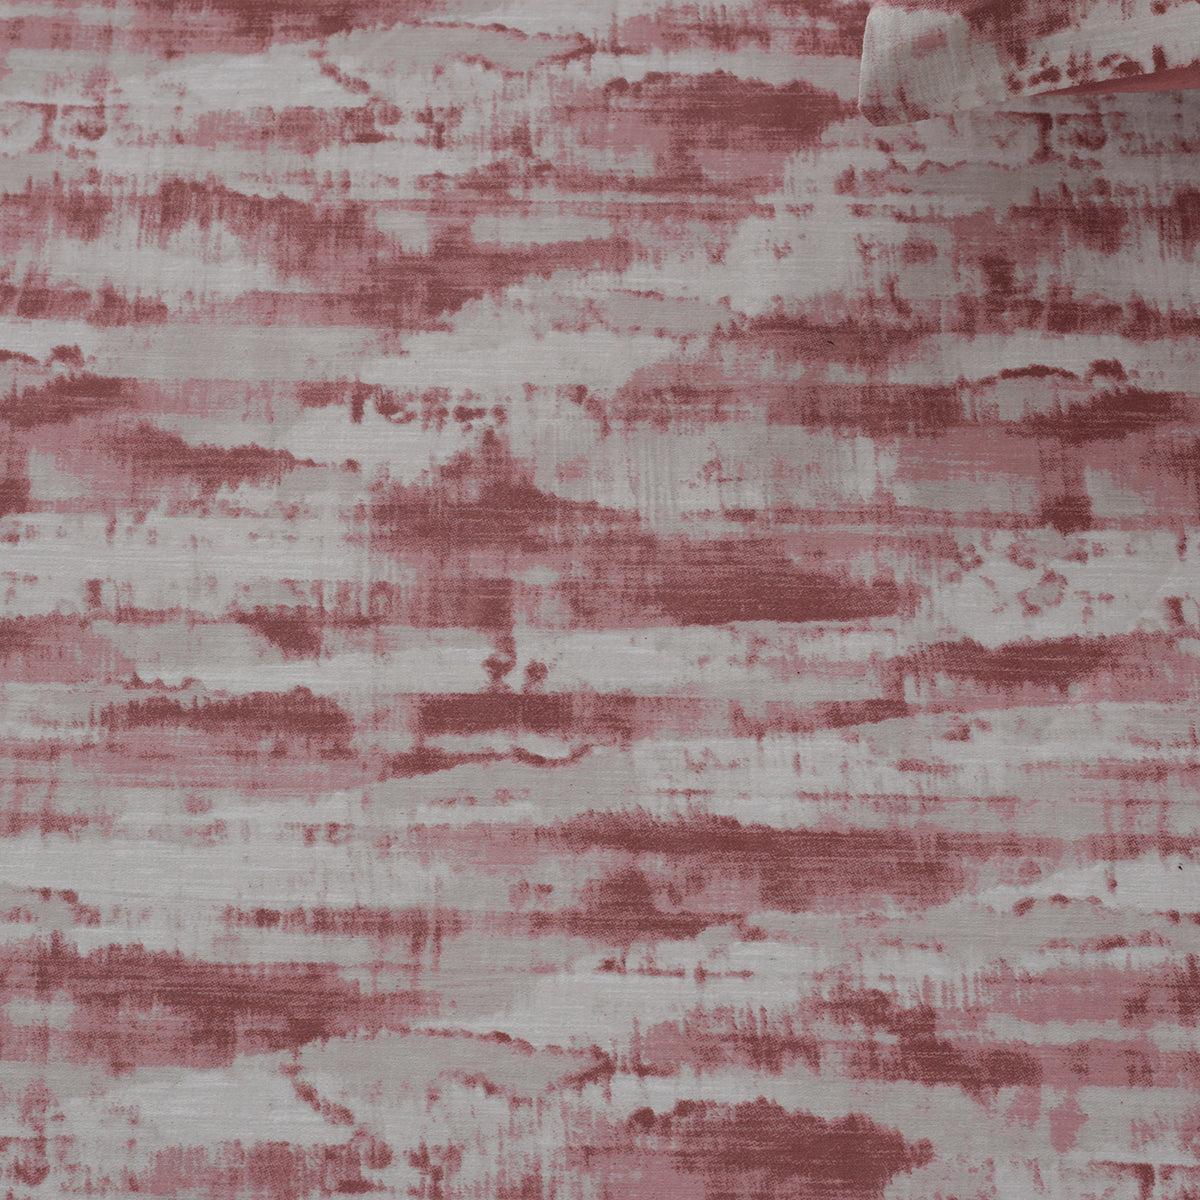 Meyer Textura Printed 100% Cotton Red Soft Bed Sheet